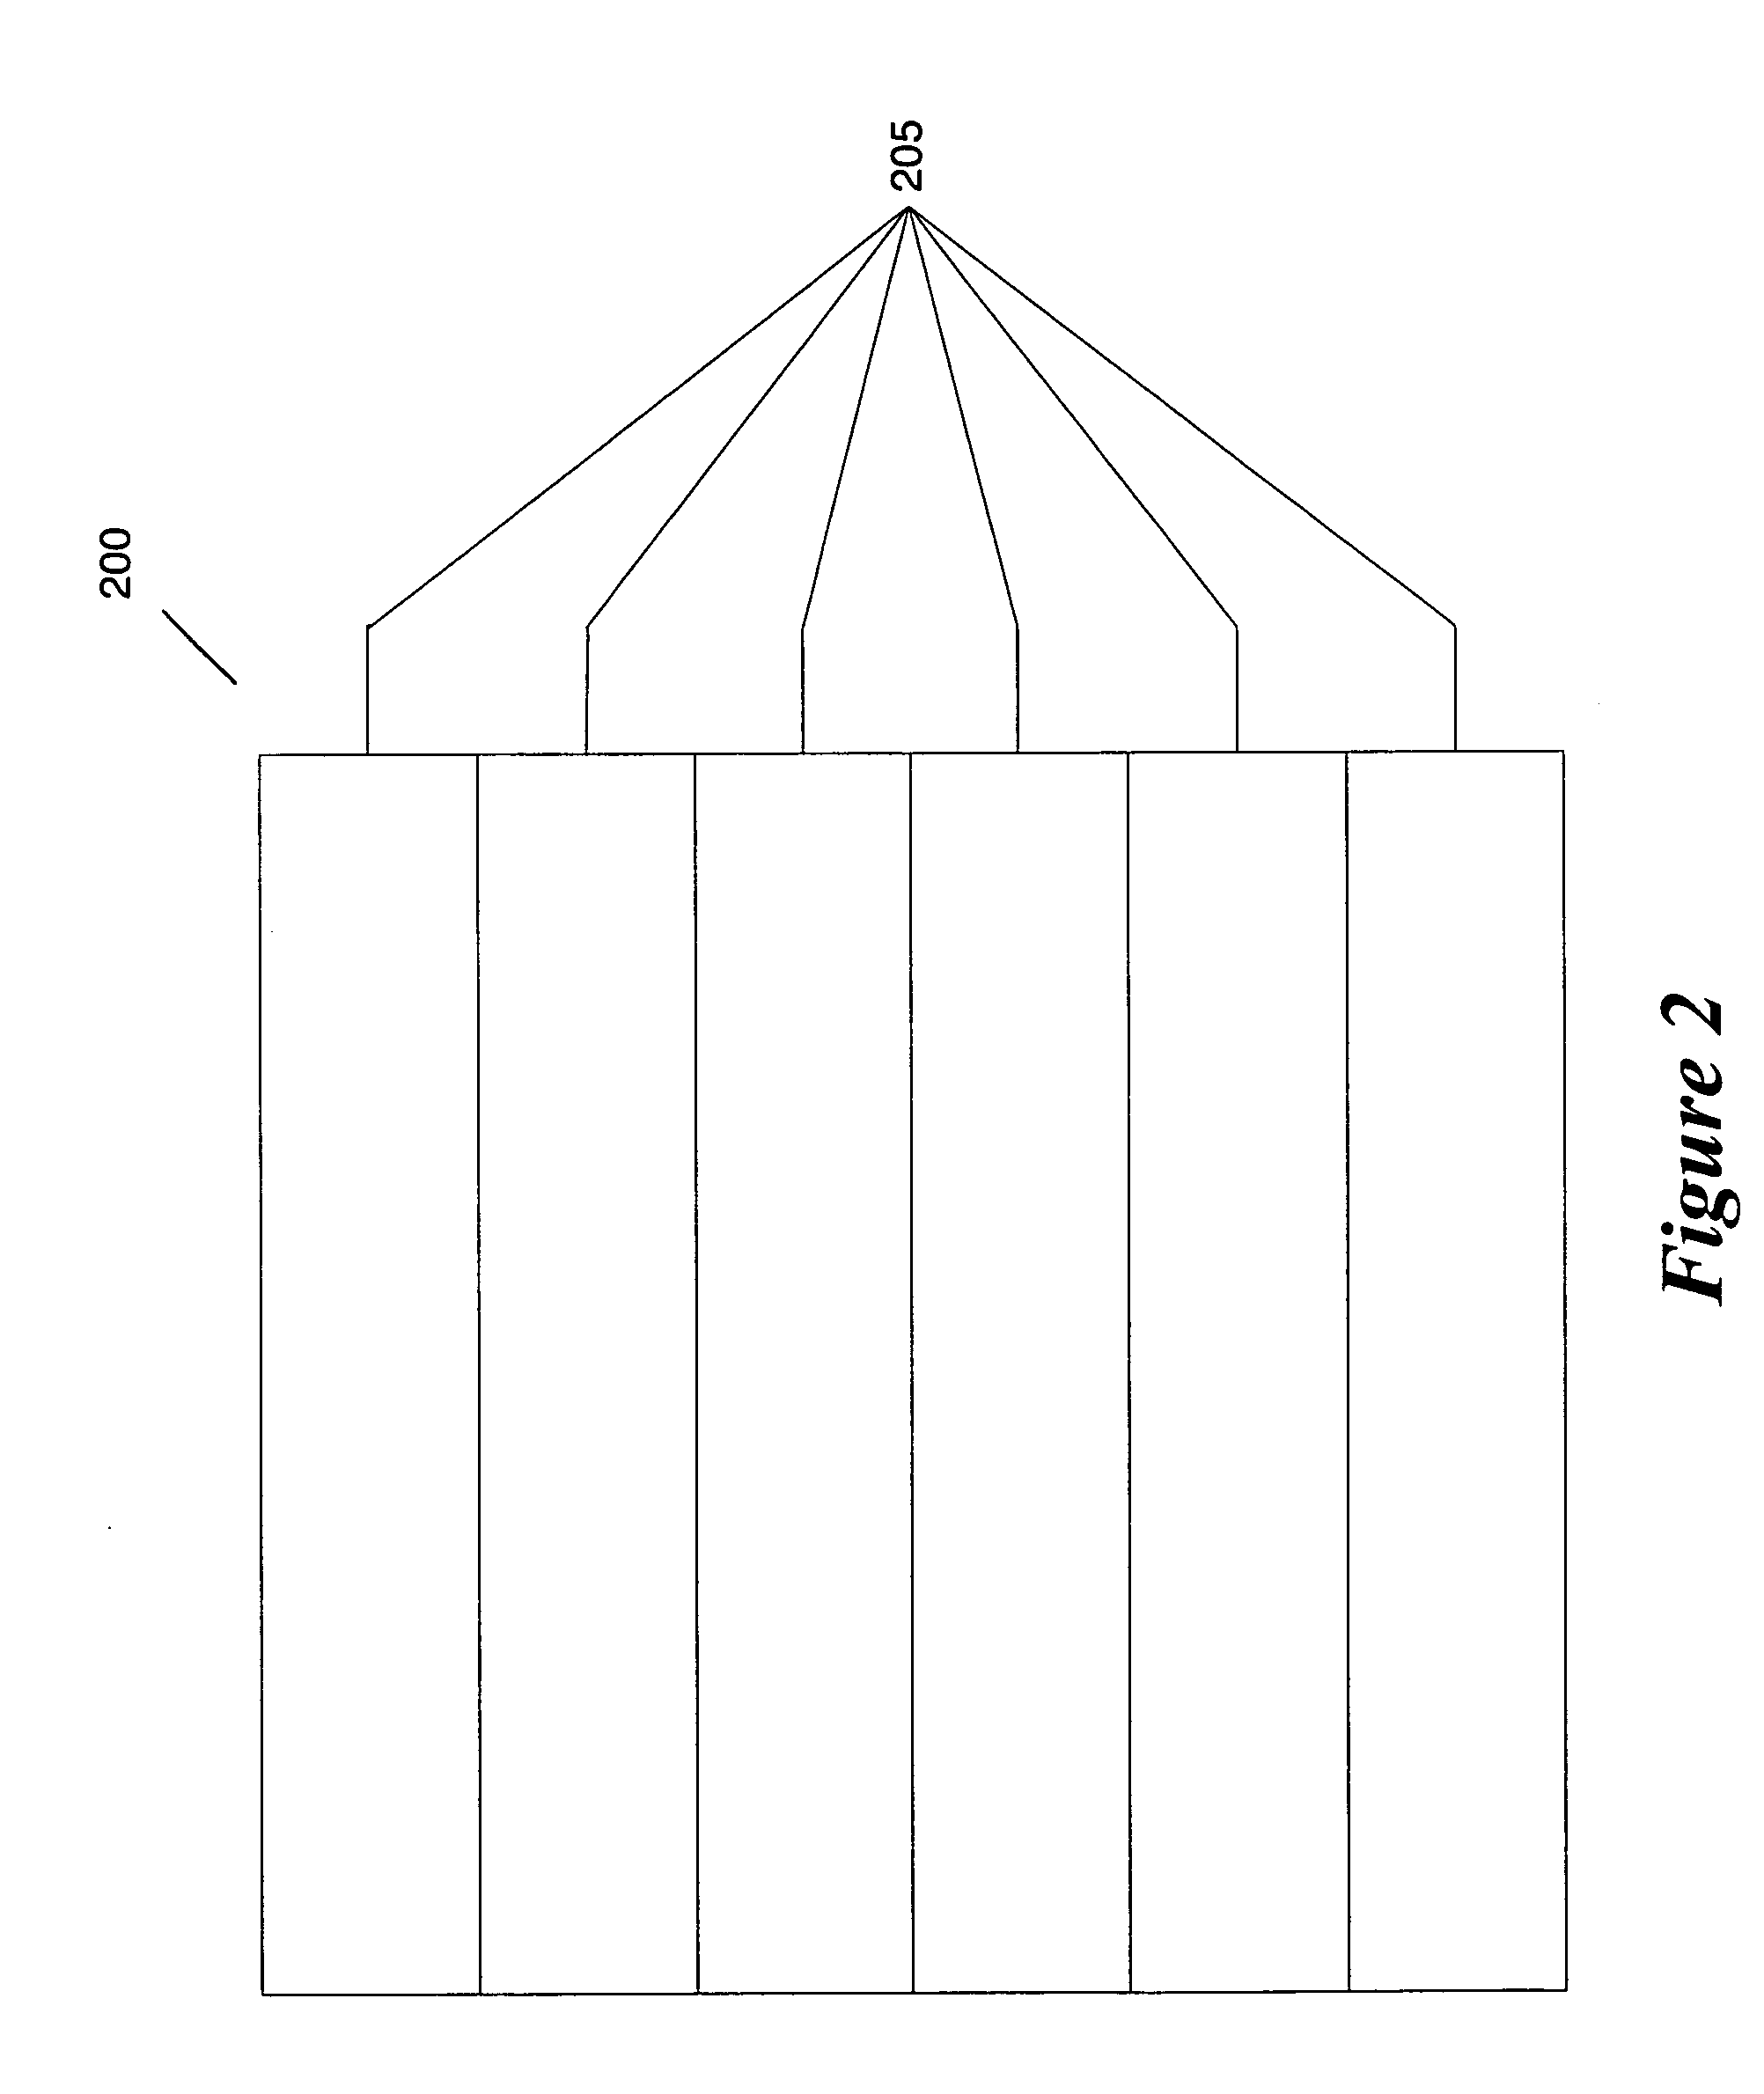 Configurable IC with trace buffer and/or logic analyzer functionality